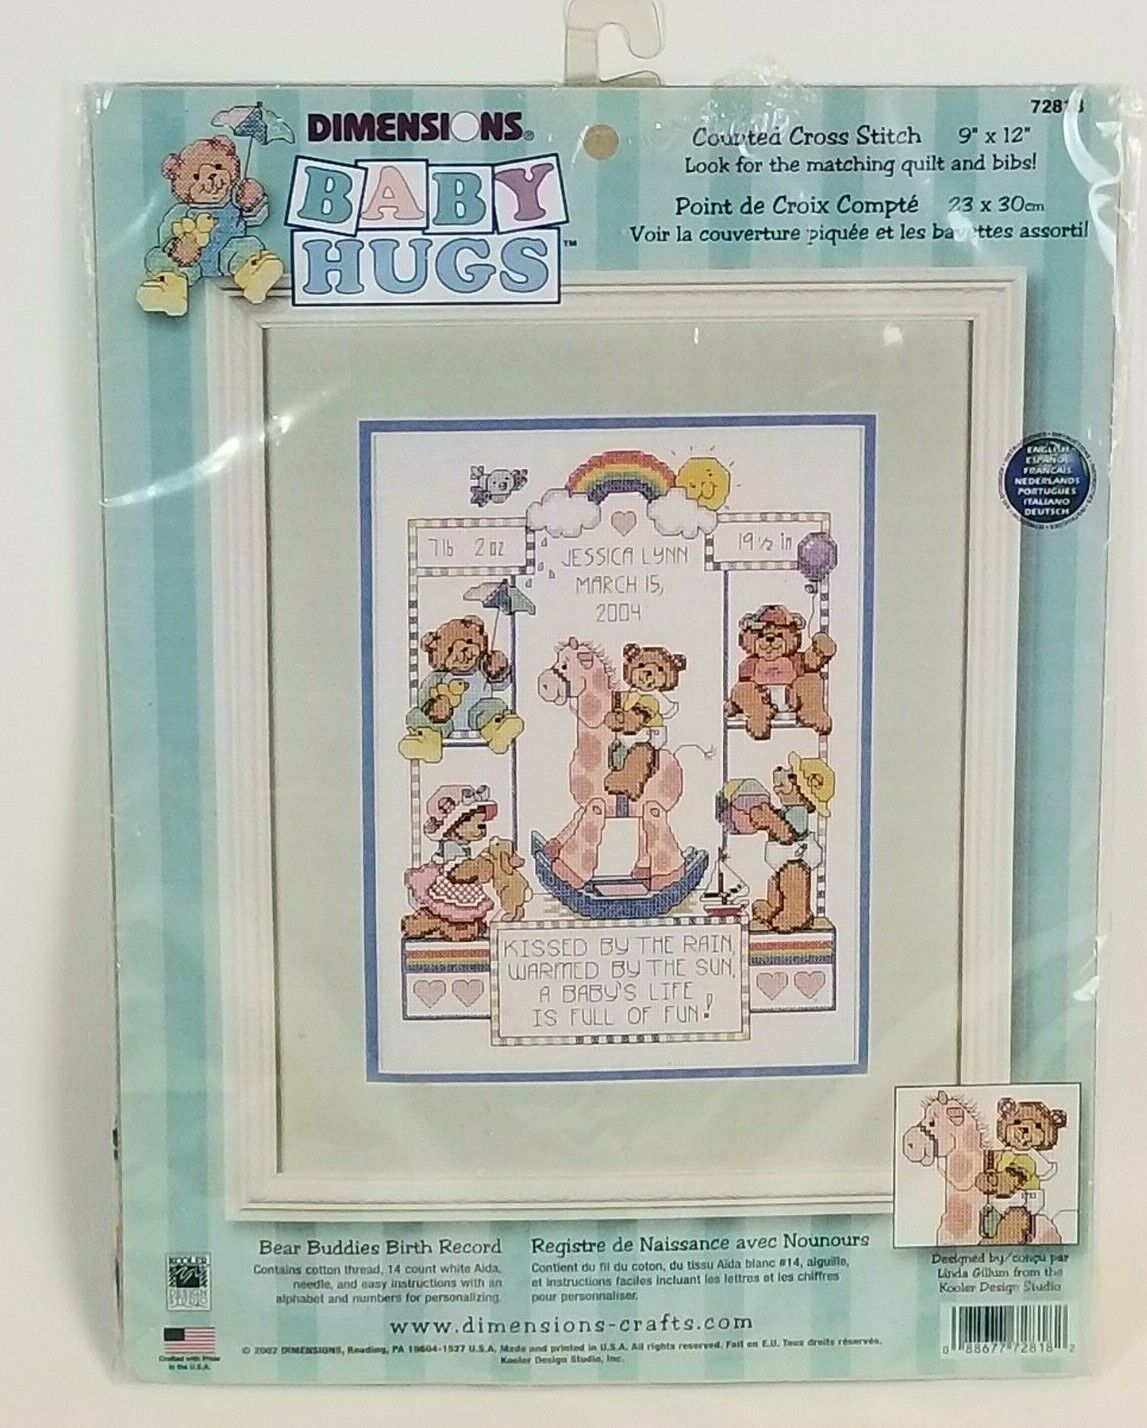 Primary image for  Dimensions Bear Buddies Birth Record Cross Stitch KIT 72818 Baby Hugs